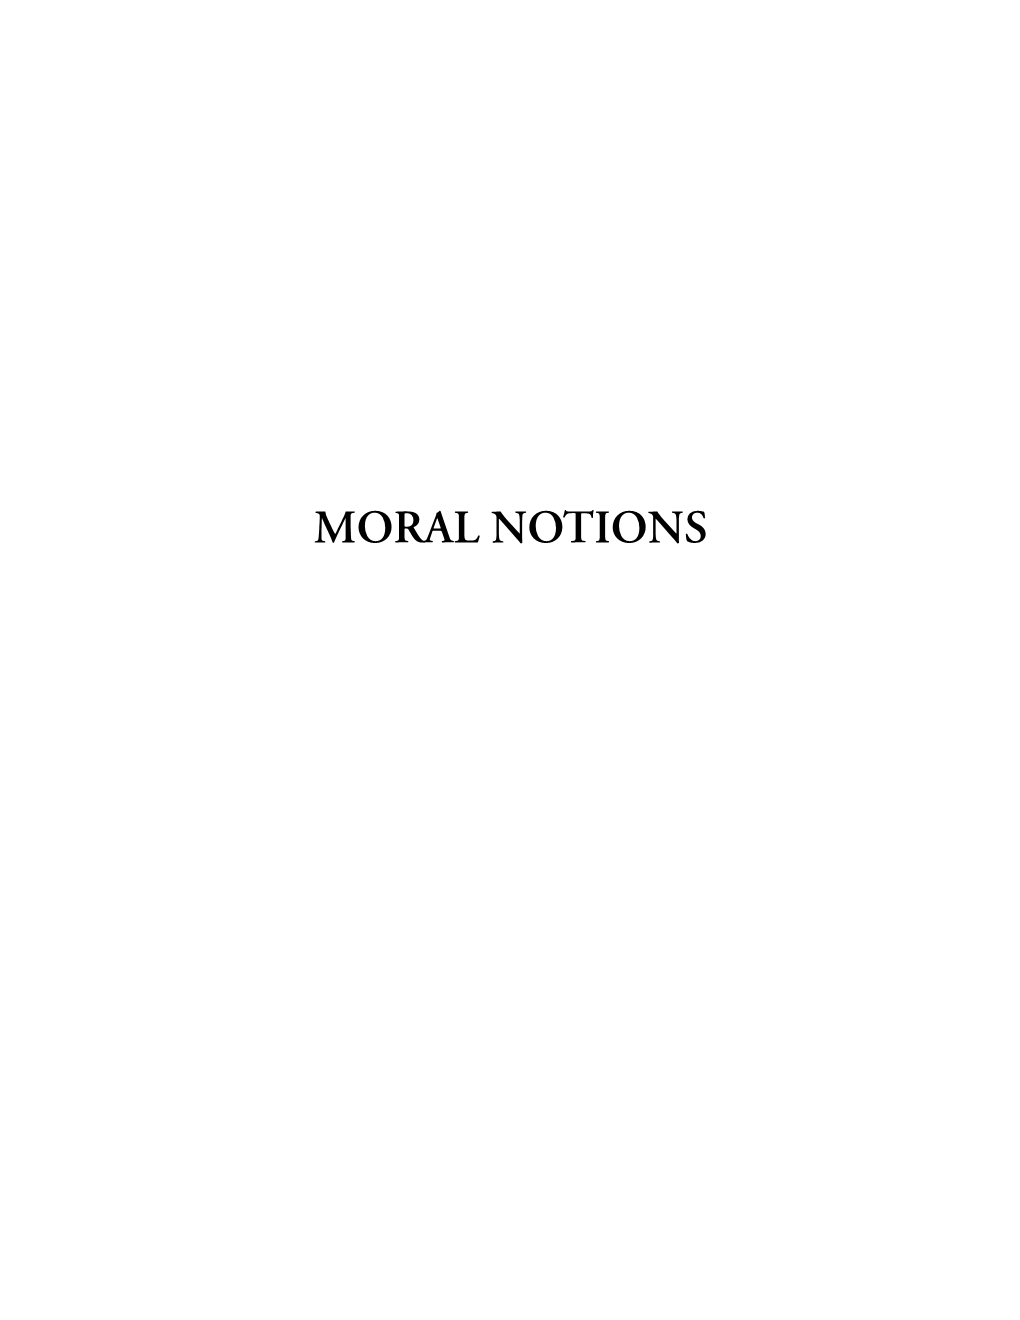 Moral Notions